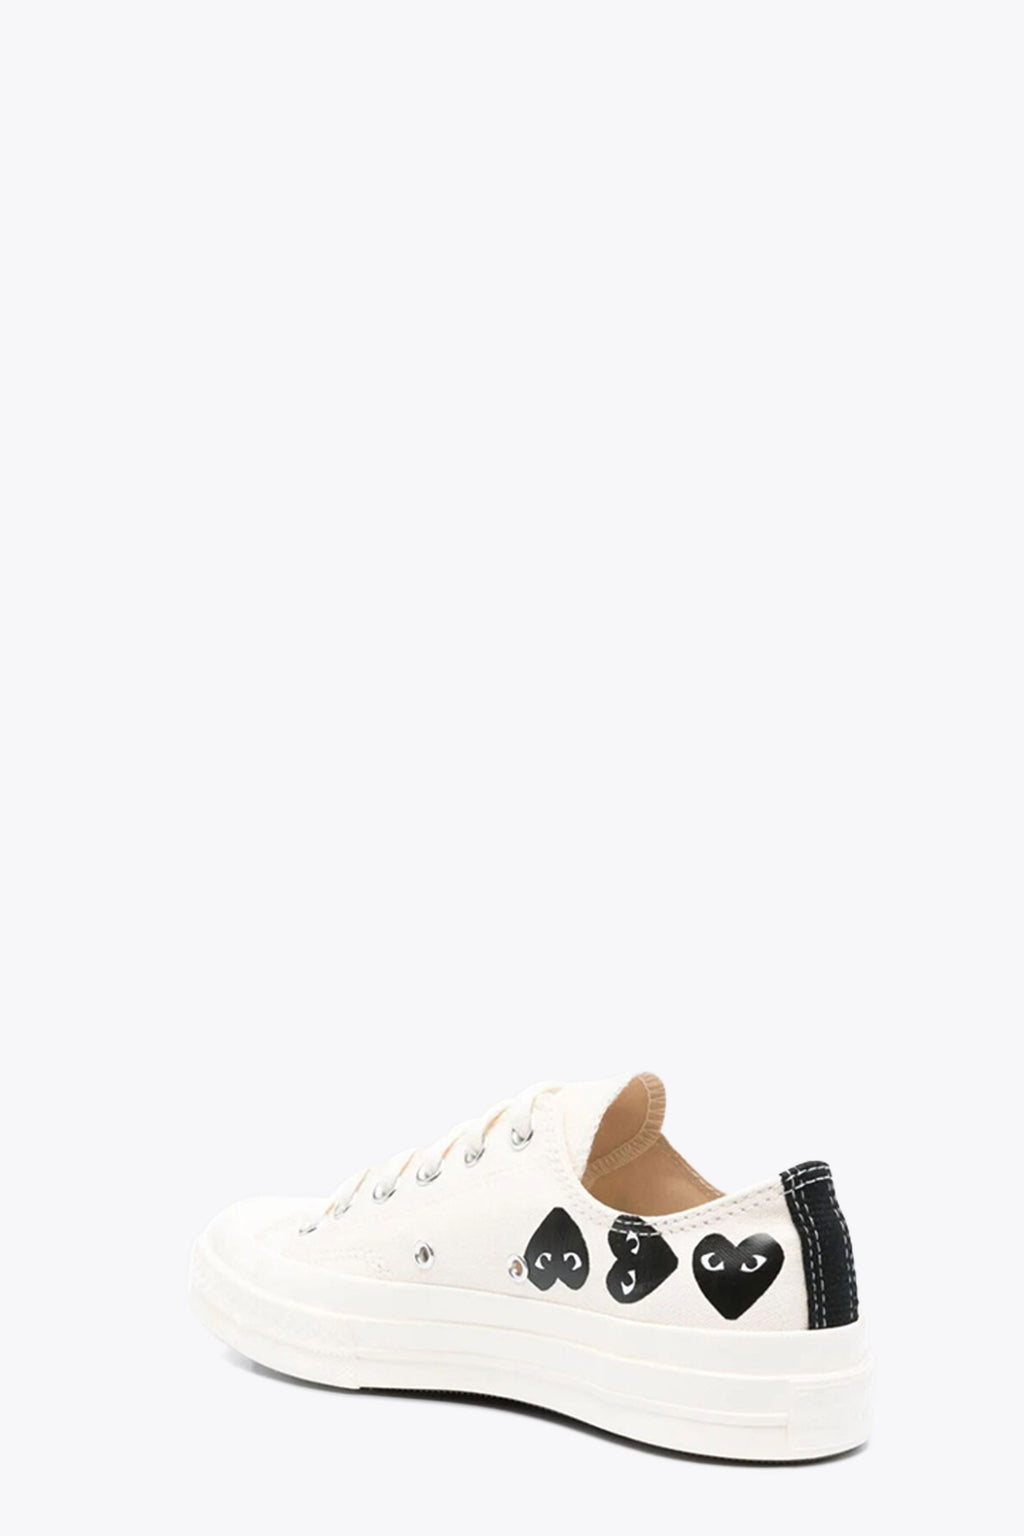 alt-image__Converse-collaboration-Chuck-Taylor-70's-off-white-canvas-low-sneaker